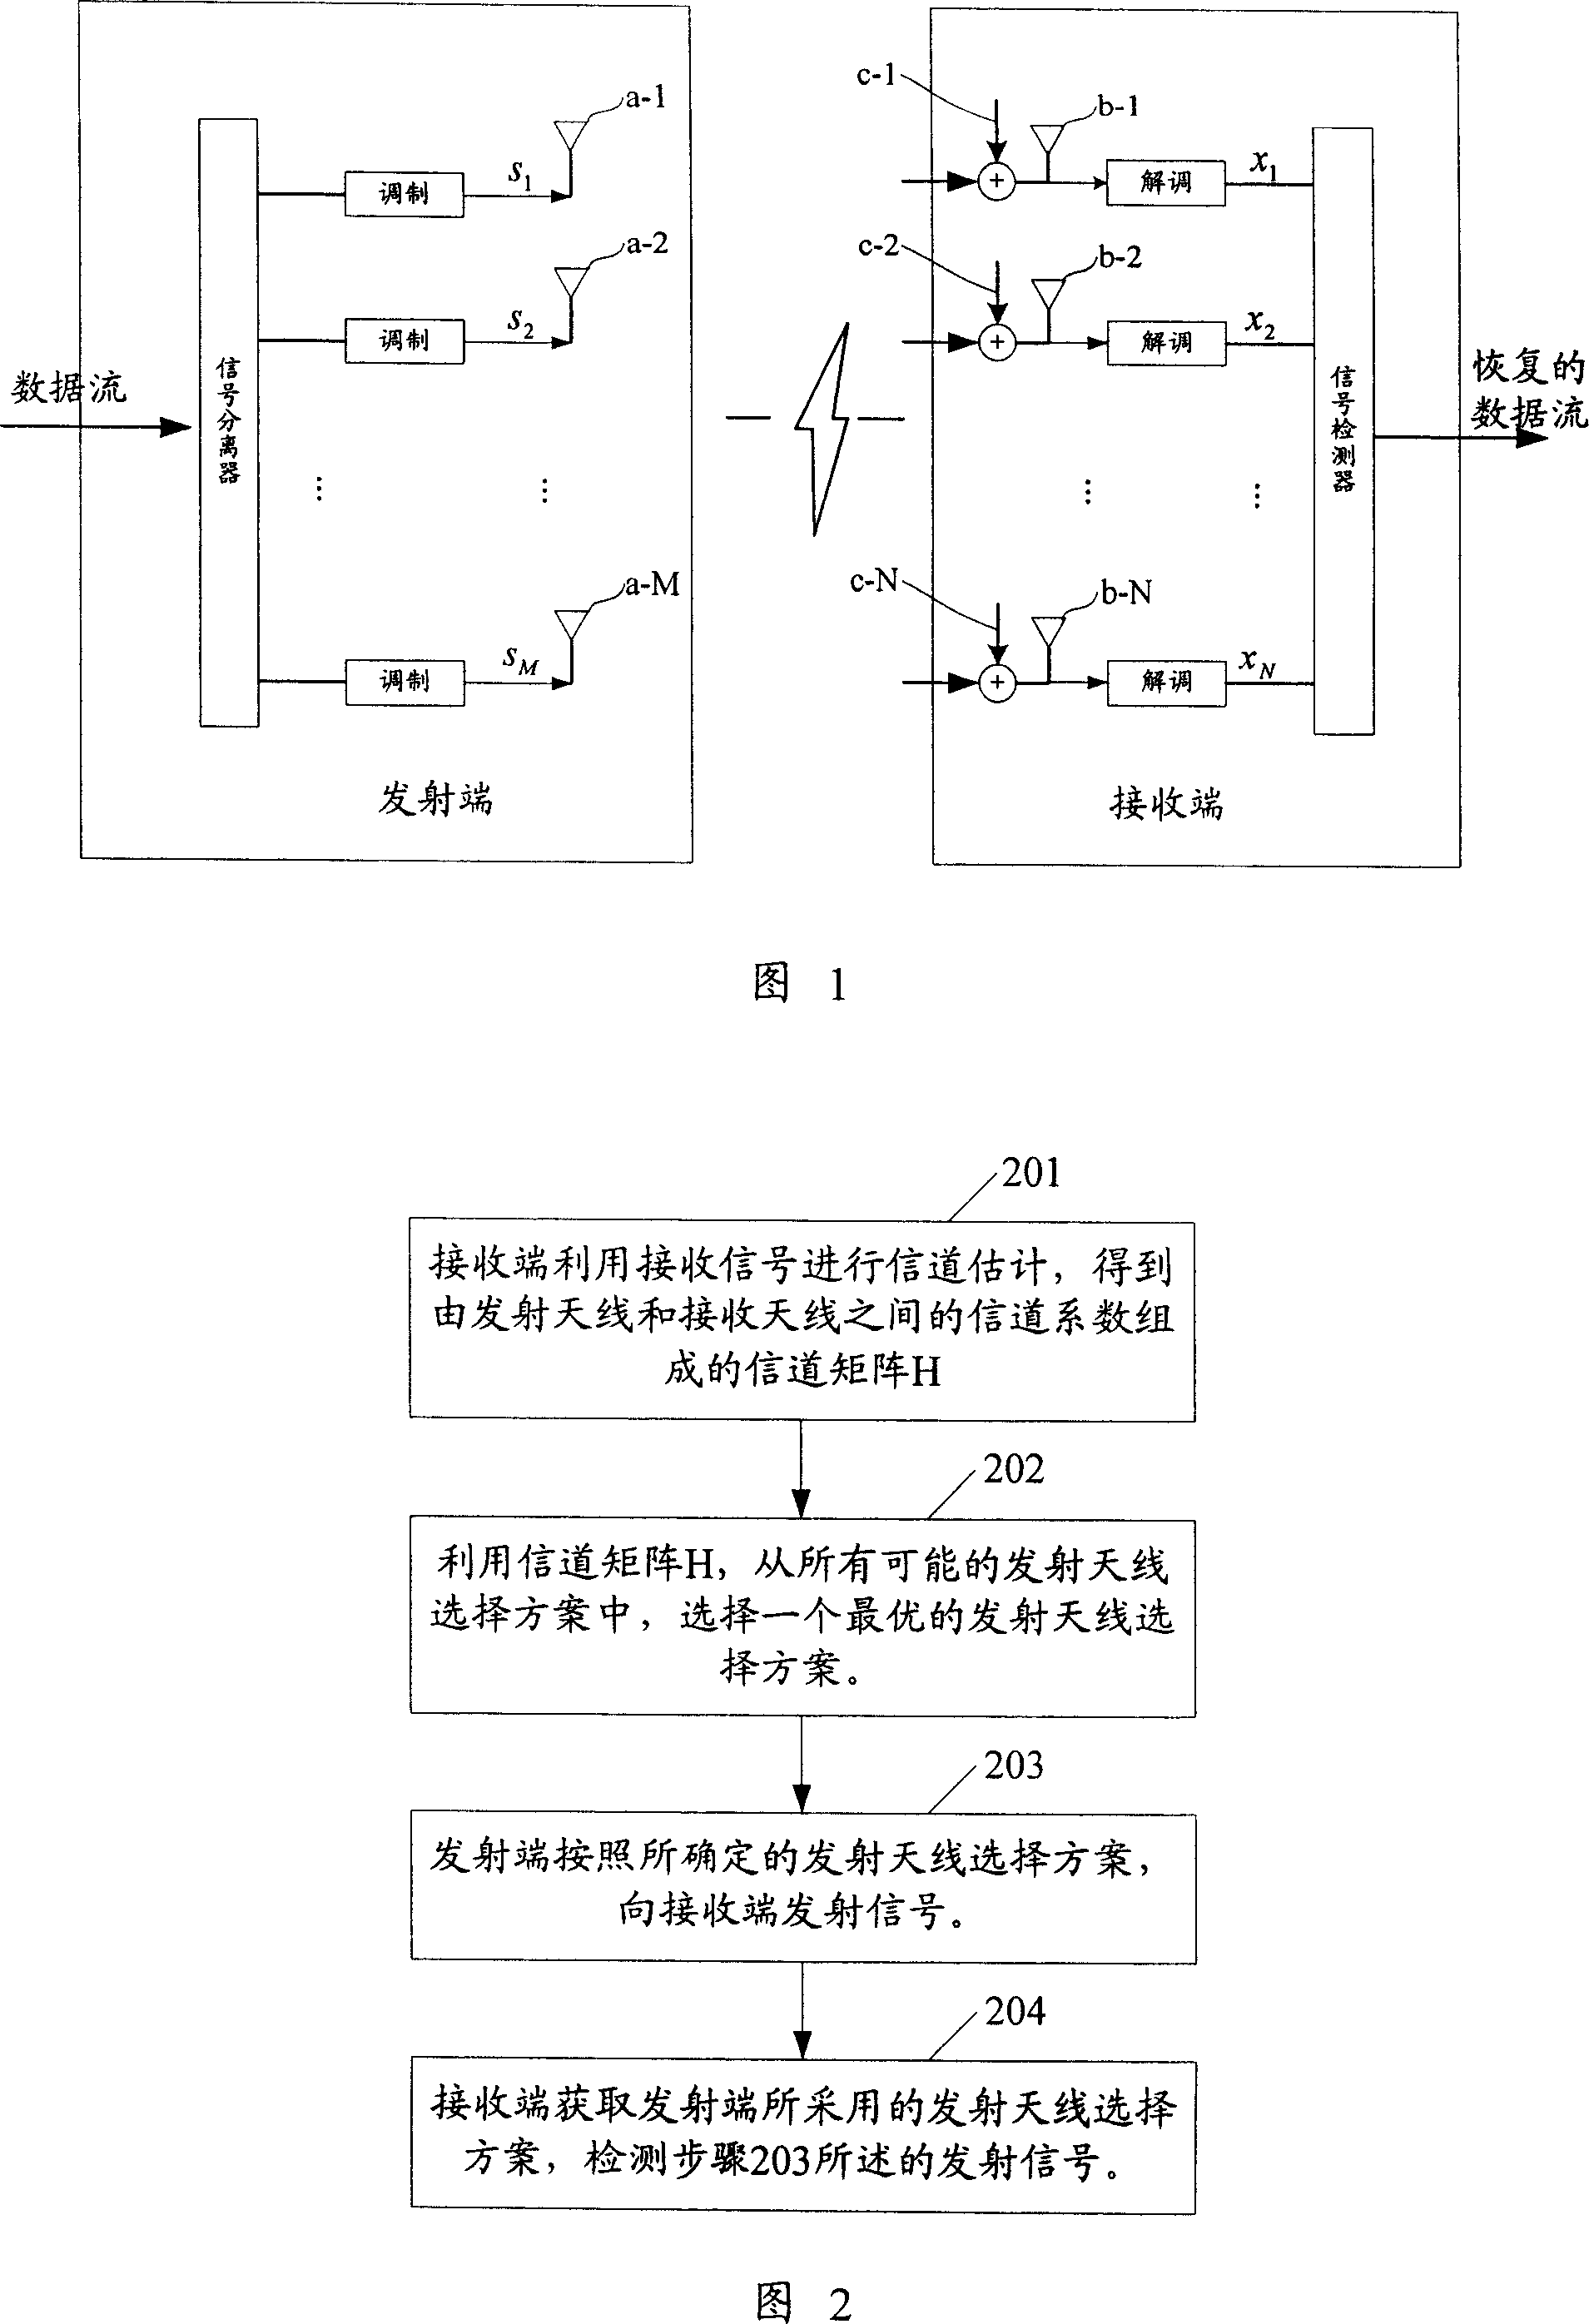 The method for antenna selection scheme and signal detection in the multi-antenna communication system